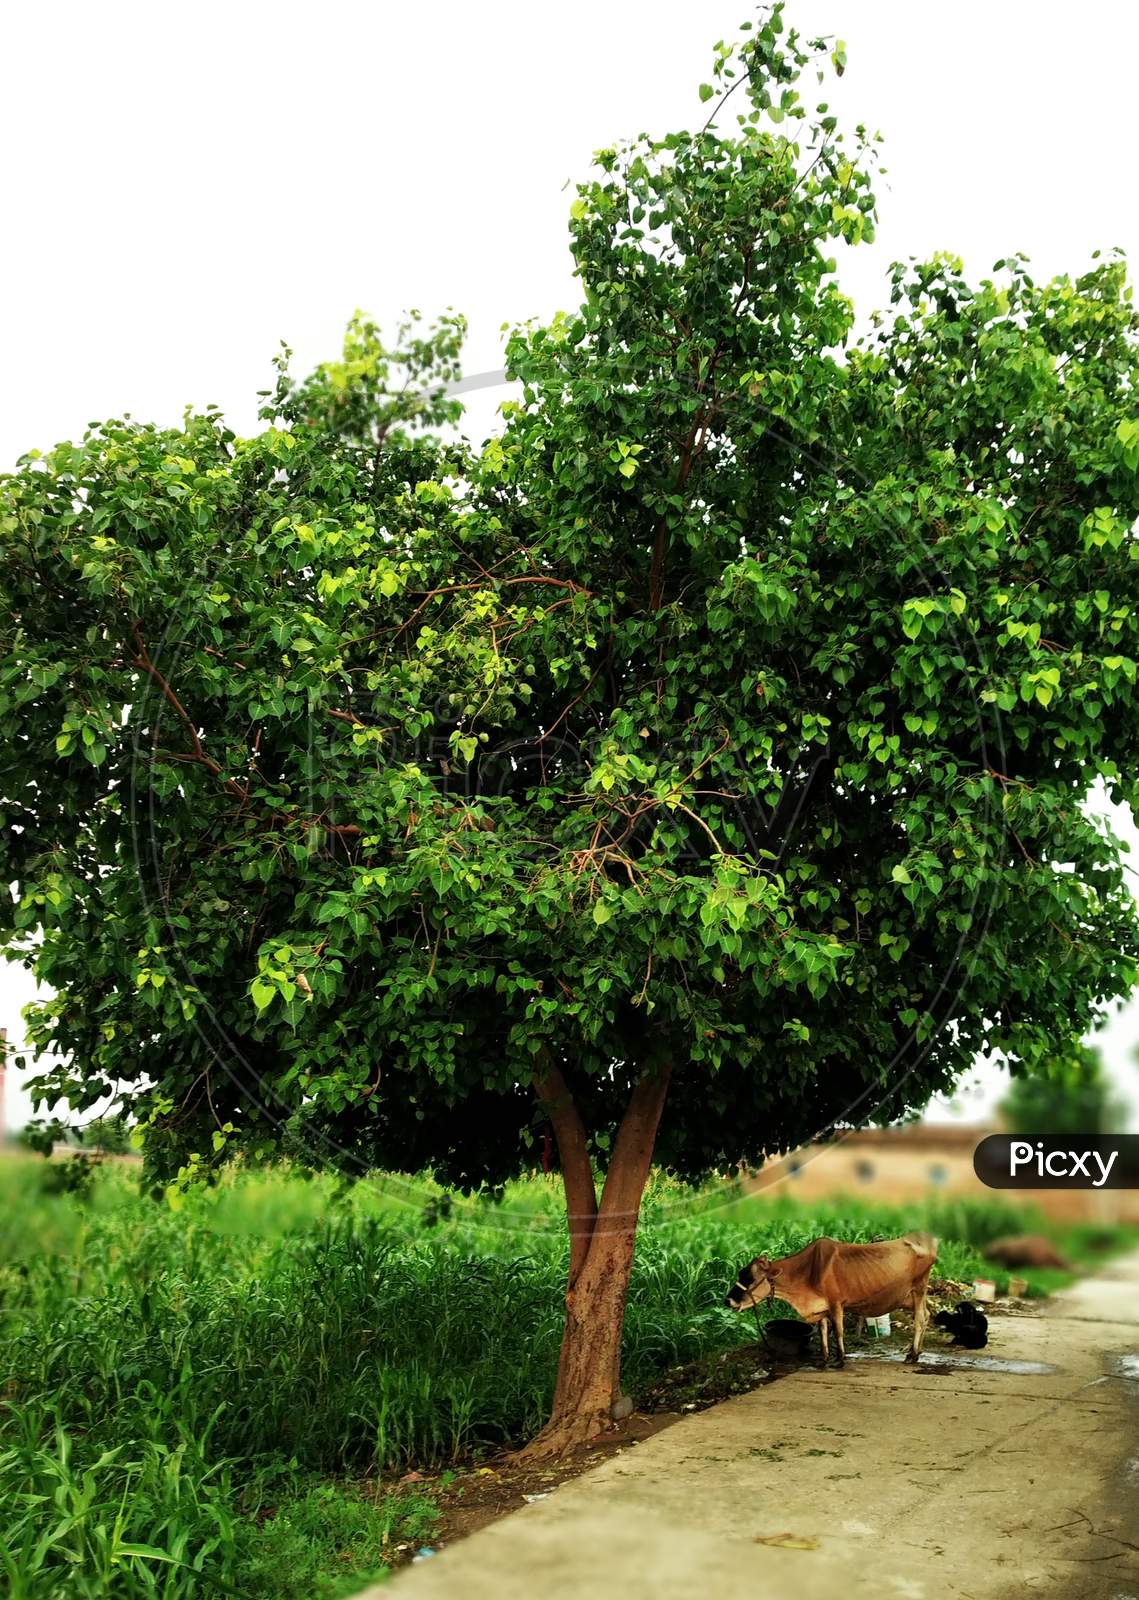 It is peepal tree, its leaves are green in color, there is a red orange cow under it, there is a black goat and in the background there are fields waving with green crops, road hai this very beautiful netural pic hai